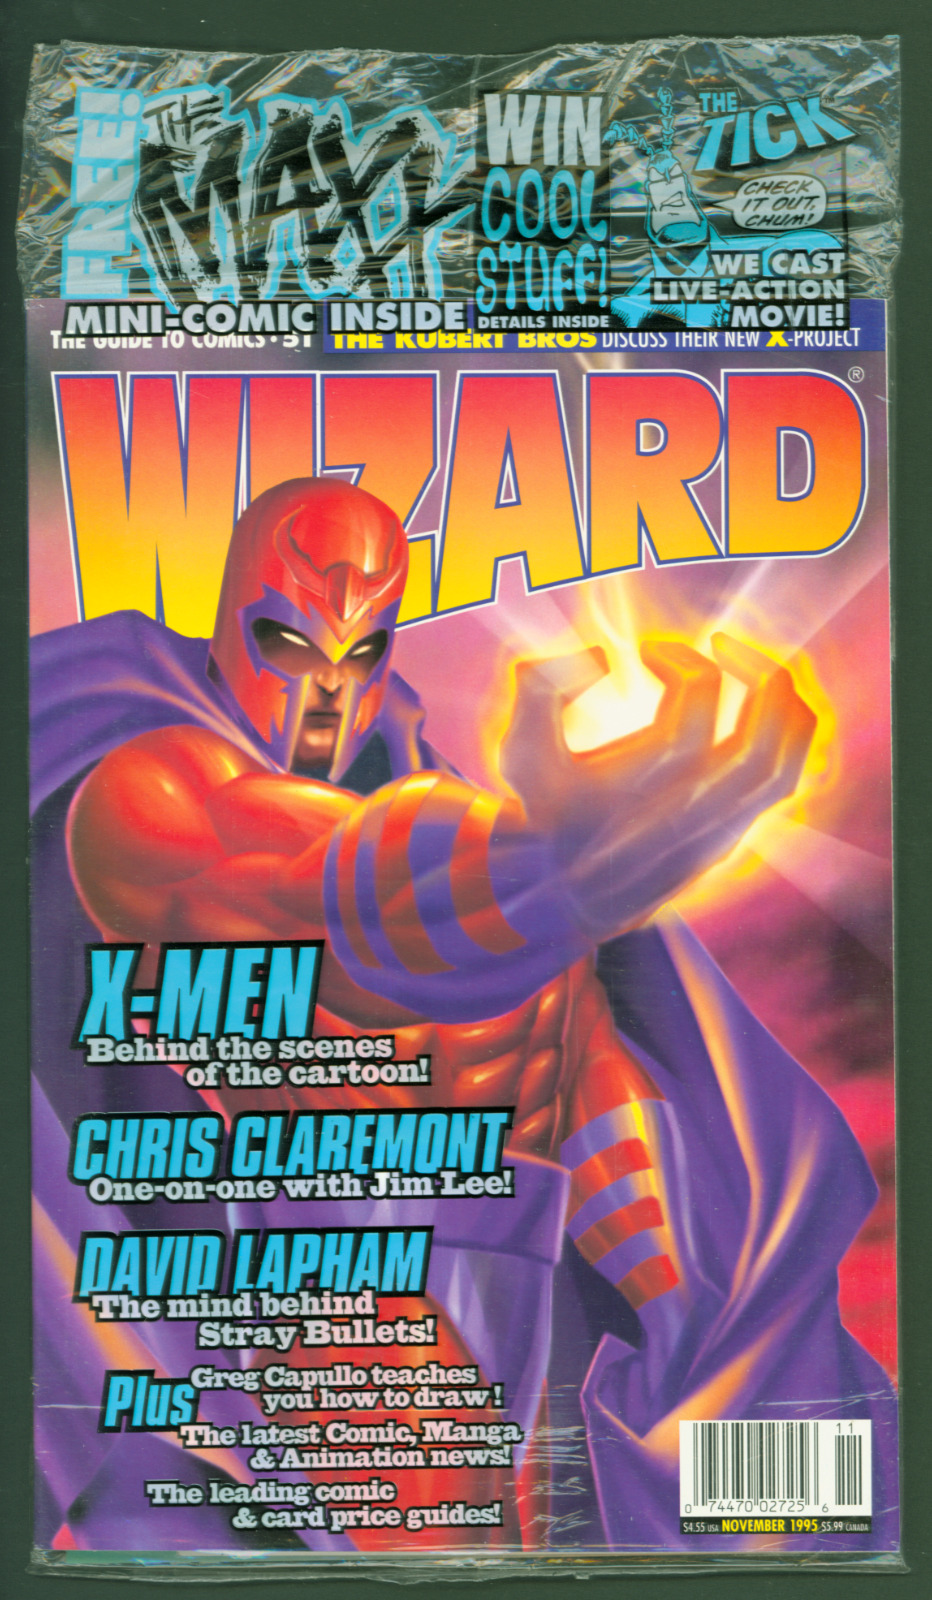 VTG 1995 Wizard Magazine #51 Magneto Cover Cyclops Promo Card Sealed New